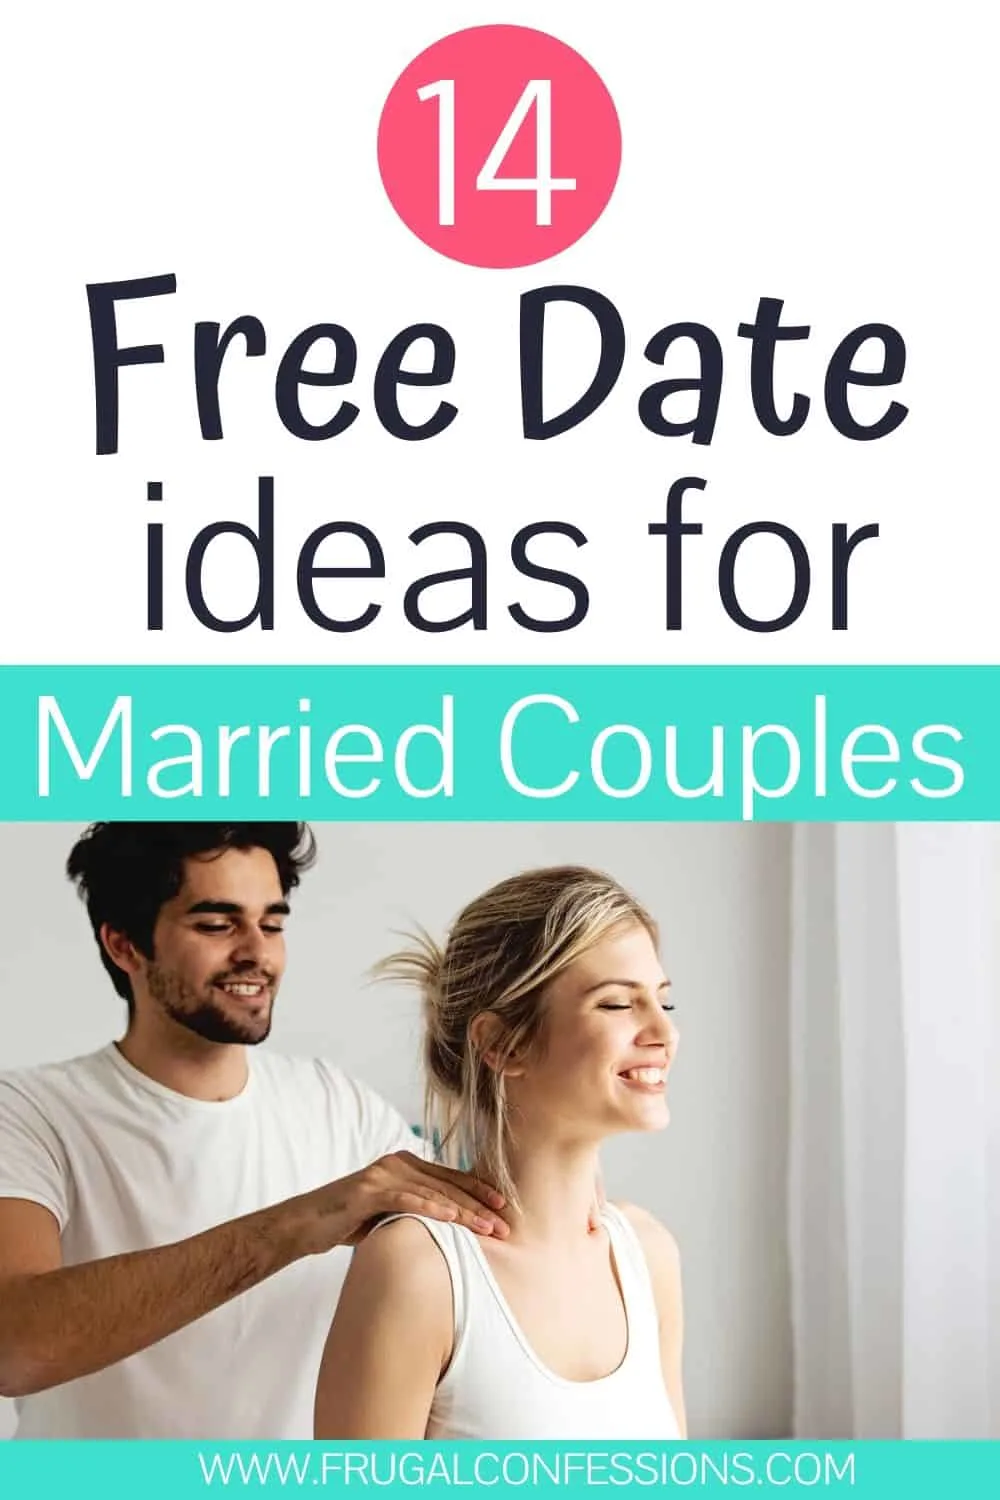 41 Free Date Ideas for Married Couples At Home (Romantic + Fun) picture